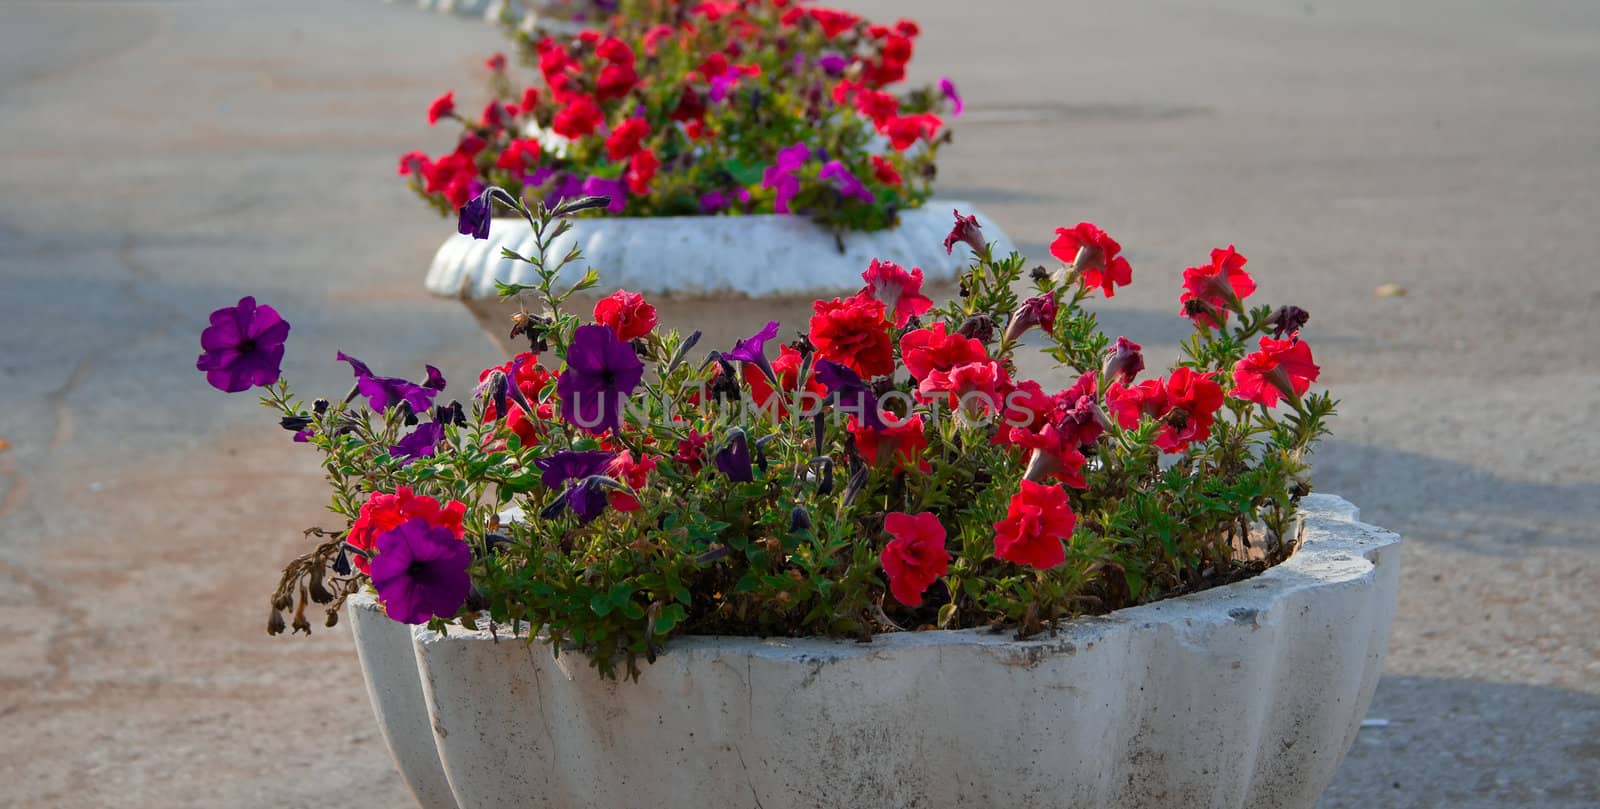 Street vases with the flowers of red and lilac colour